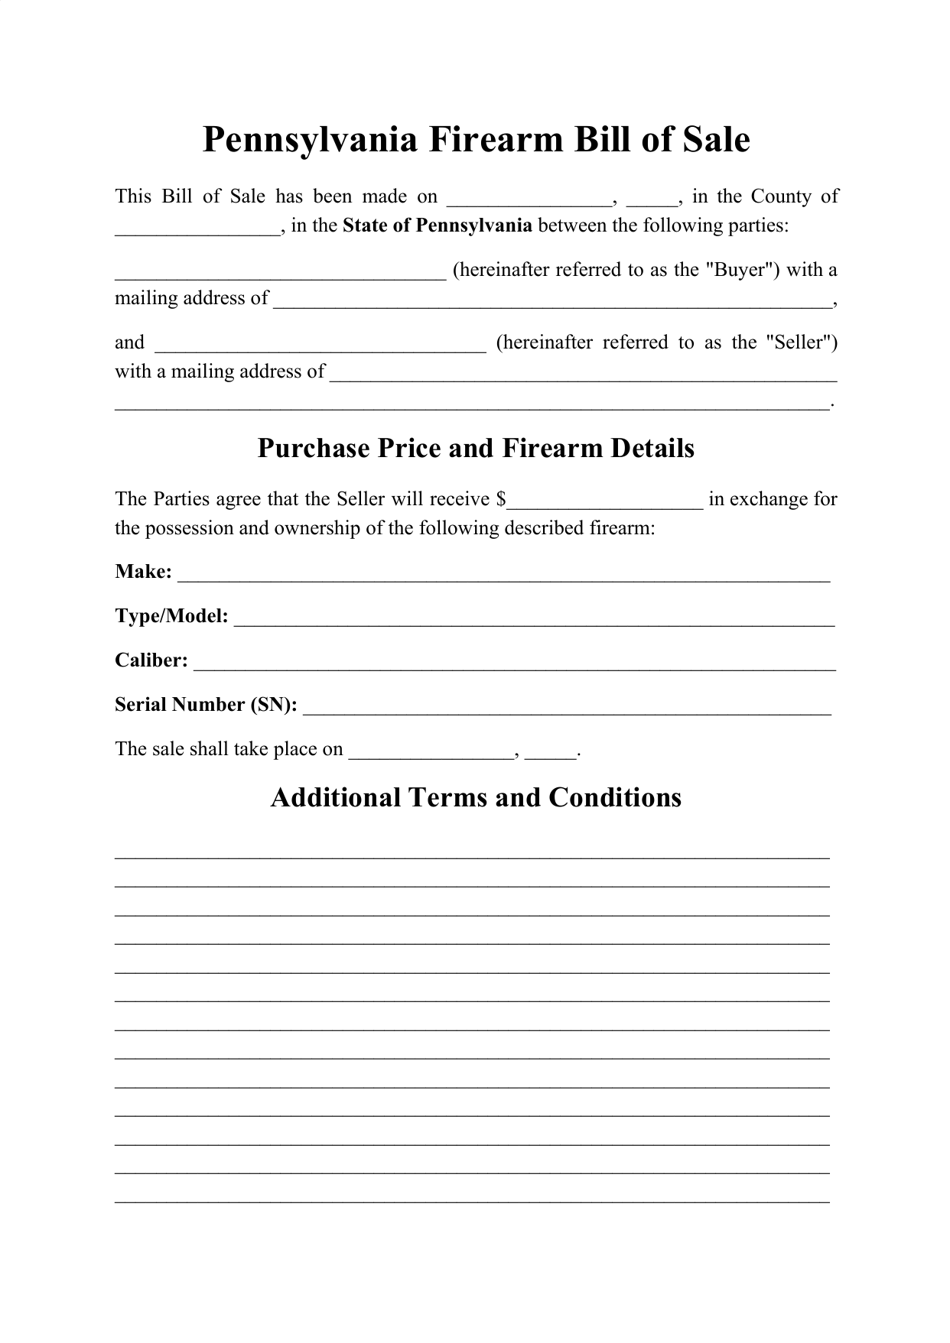 pennsylvania-firearm-bill-of-sale-form-fill-out-sign-online-and